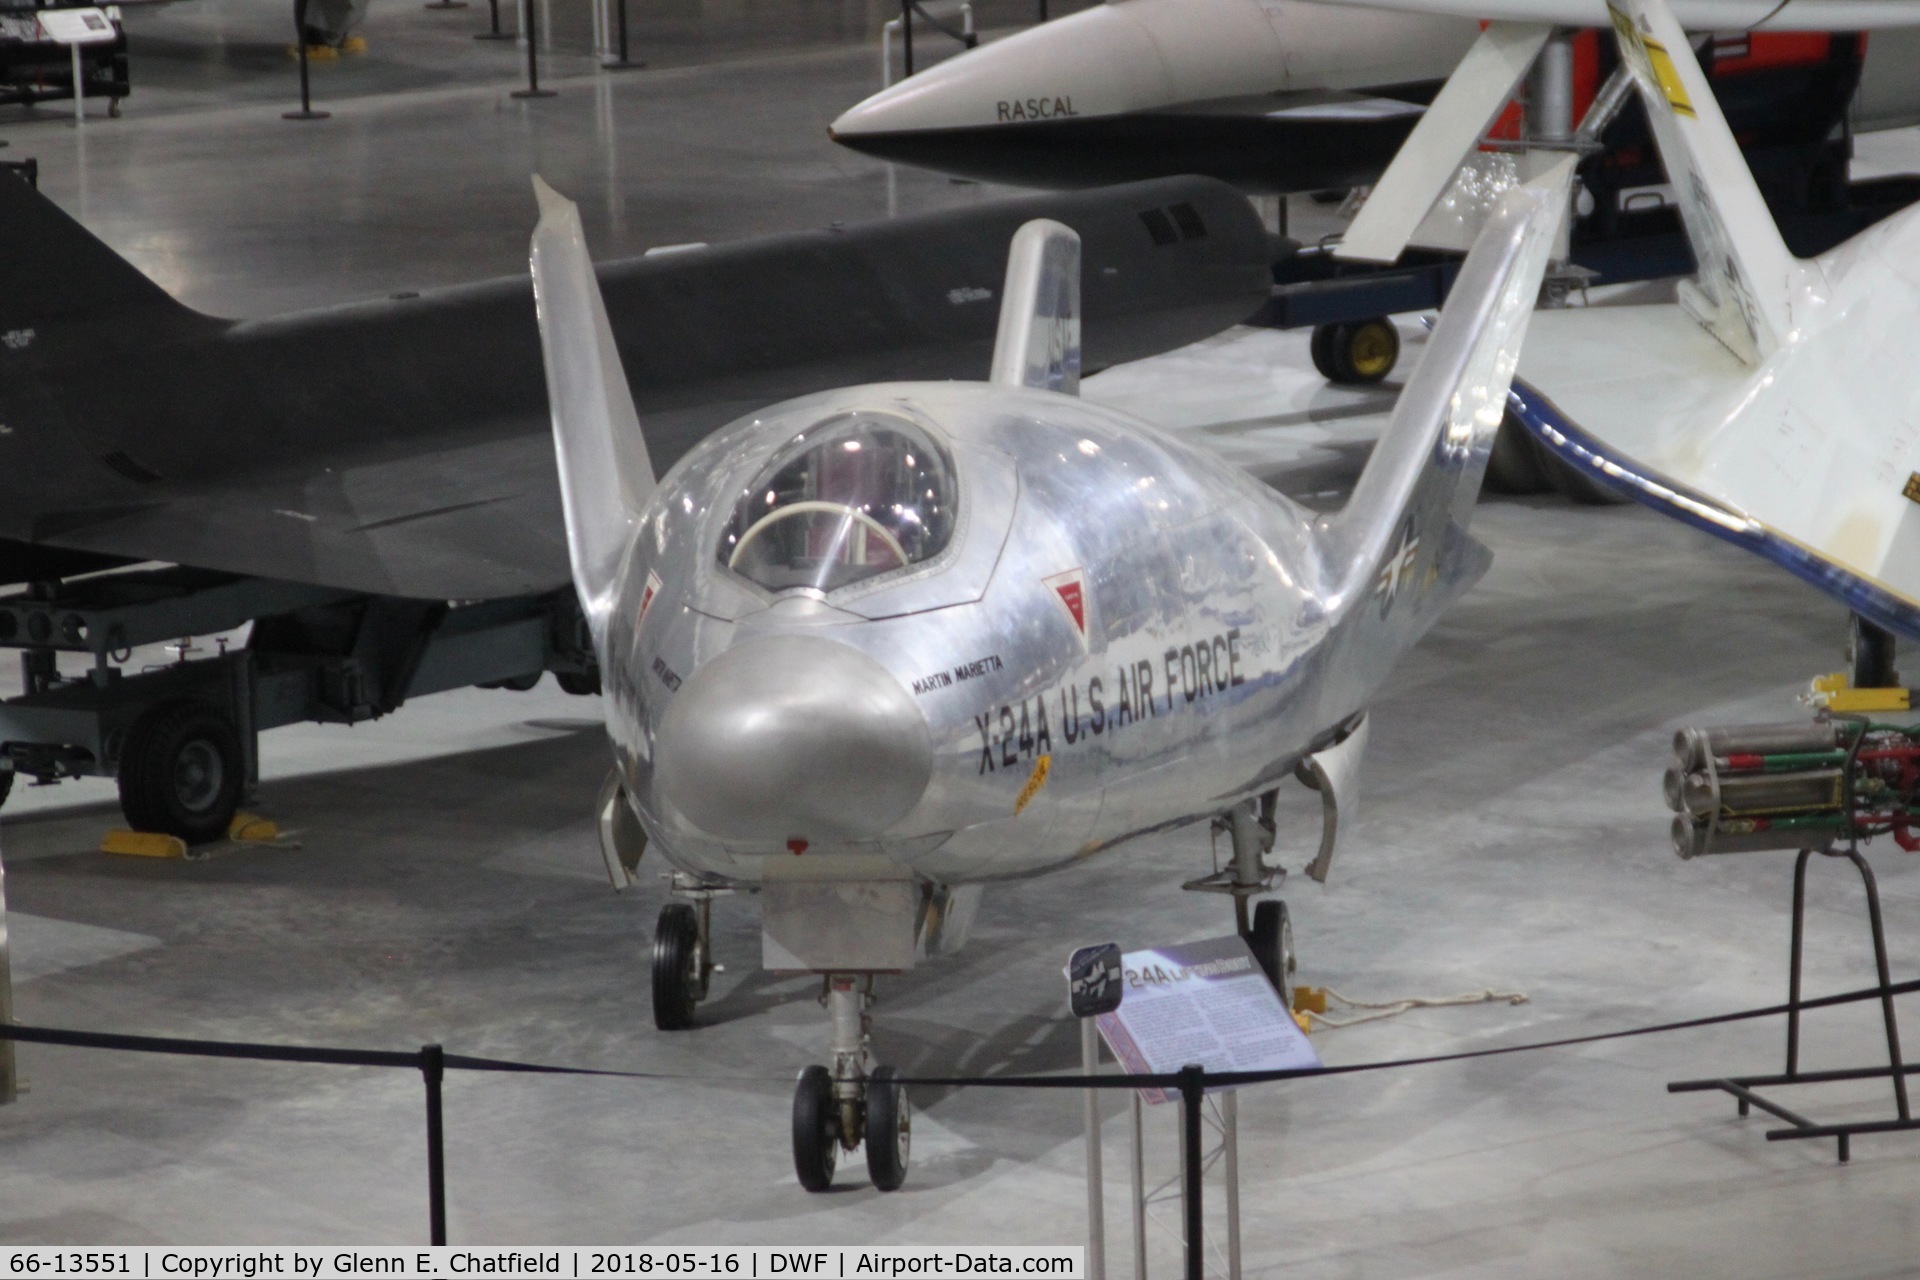 66-13551, Martin Marietta X-24A (SV-5J) C/N 2, SV-5J modified to look like an X-24A. Development aircraft for the X-24 program. Located now at the National Museum of the U.S. Air Force. S/N is bogus